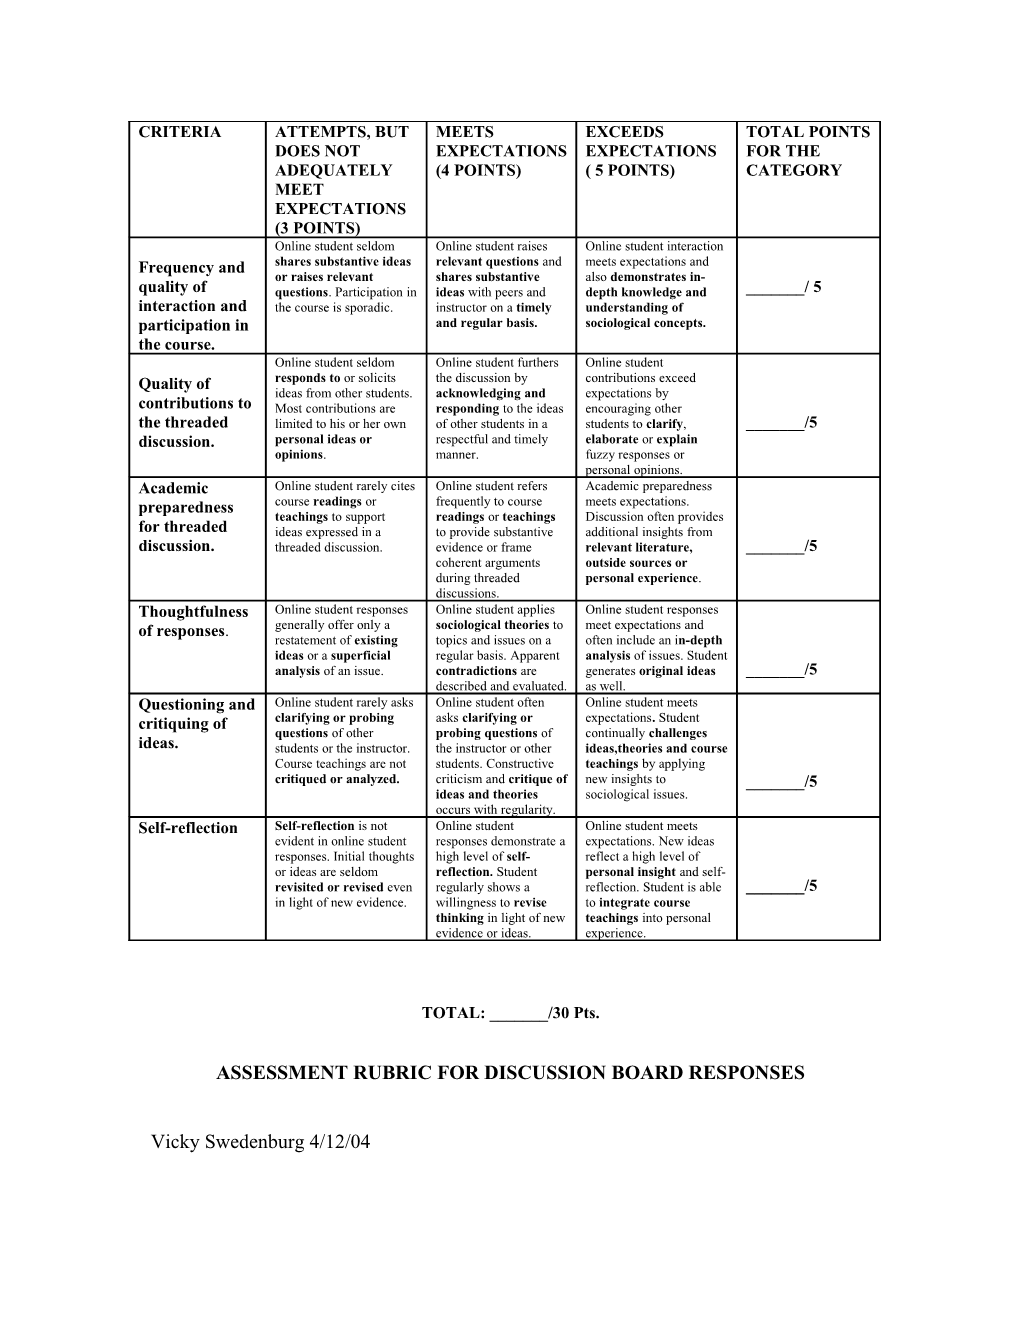 Assessment Rubric for Discussion Board Responses